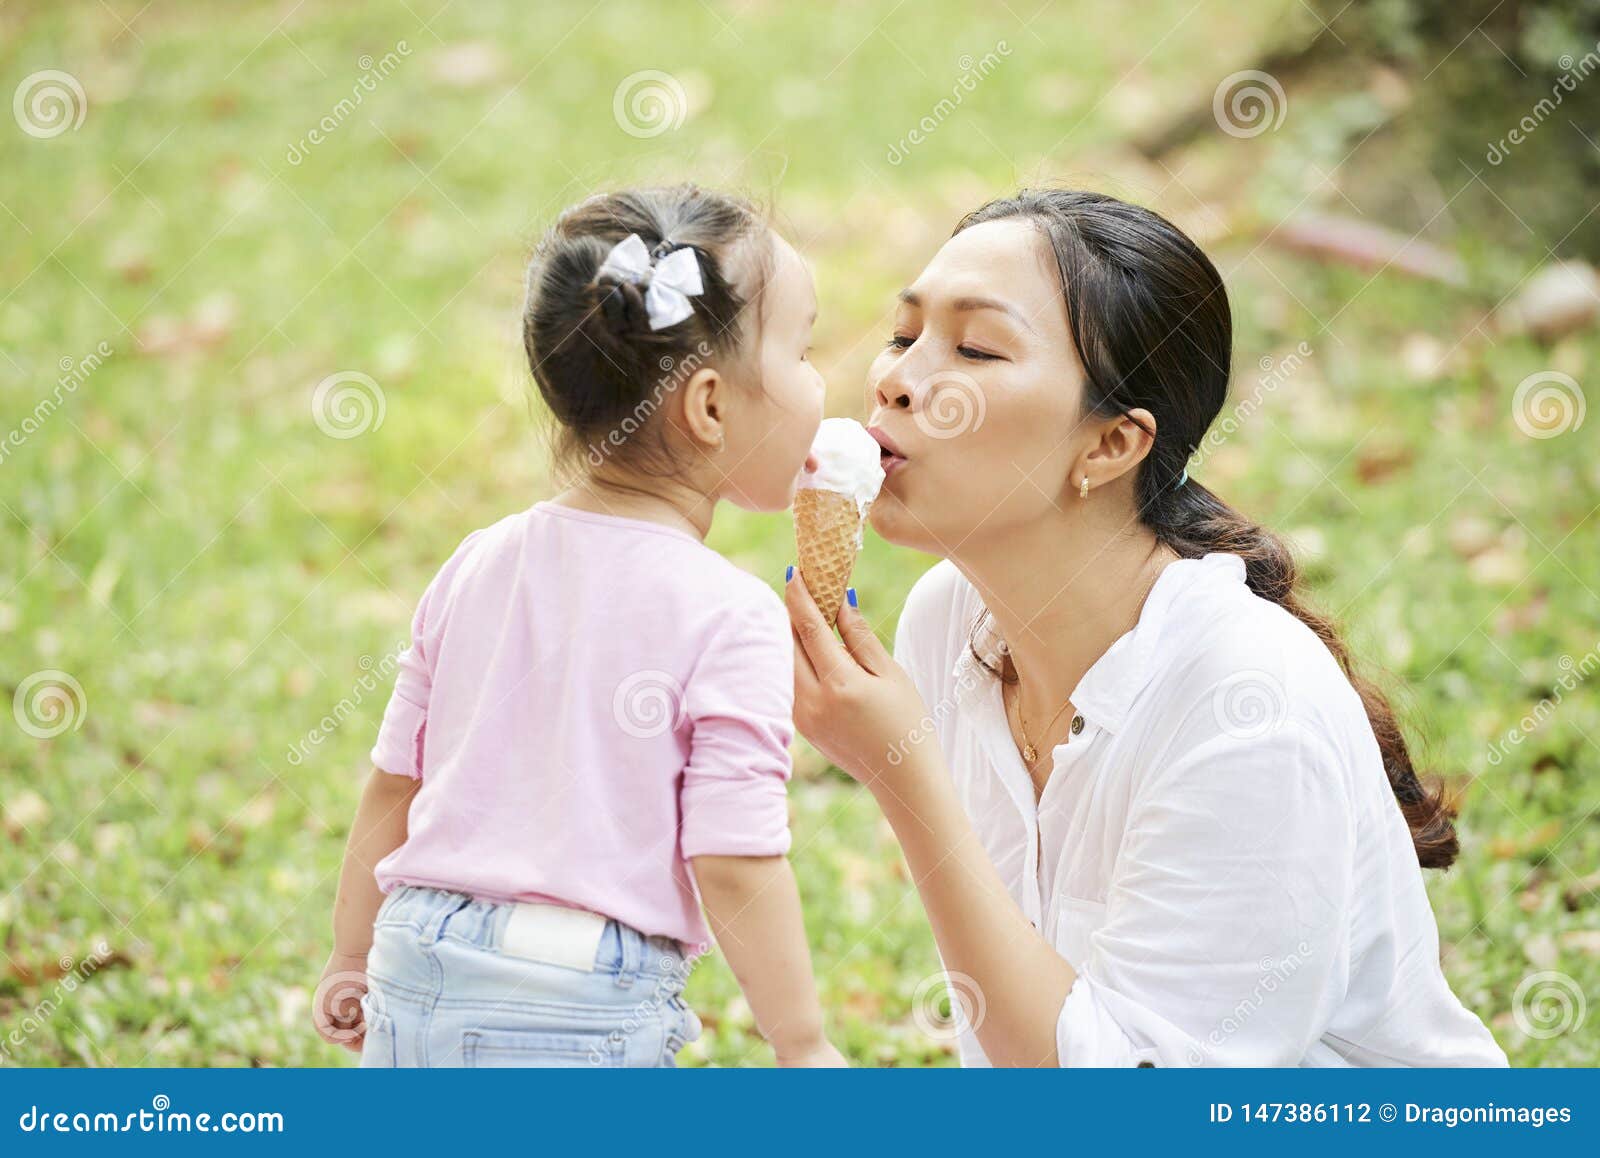 bing de la cruz recommends mother and daughter licking pic